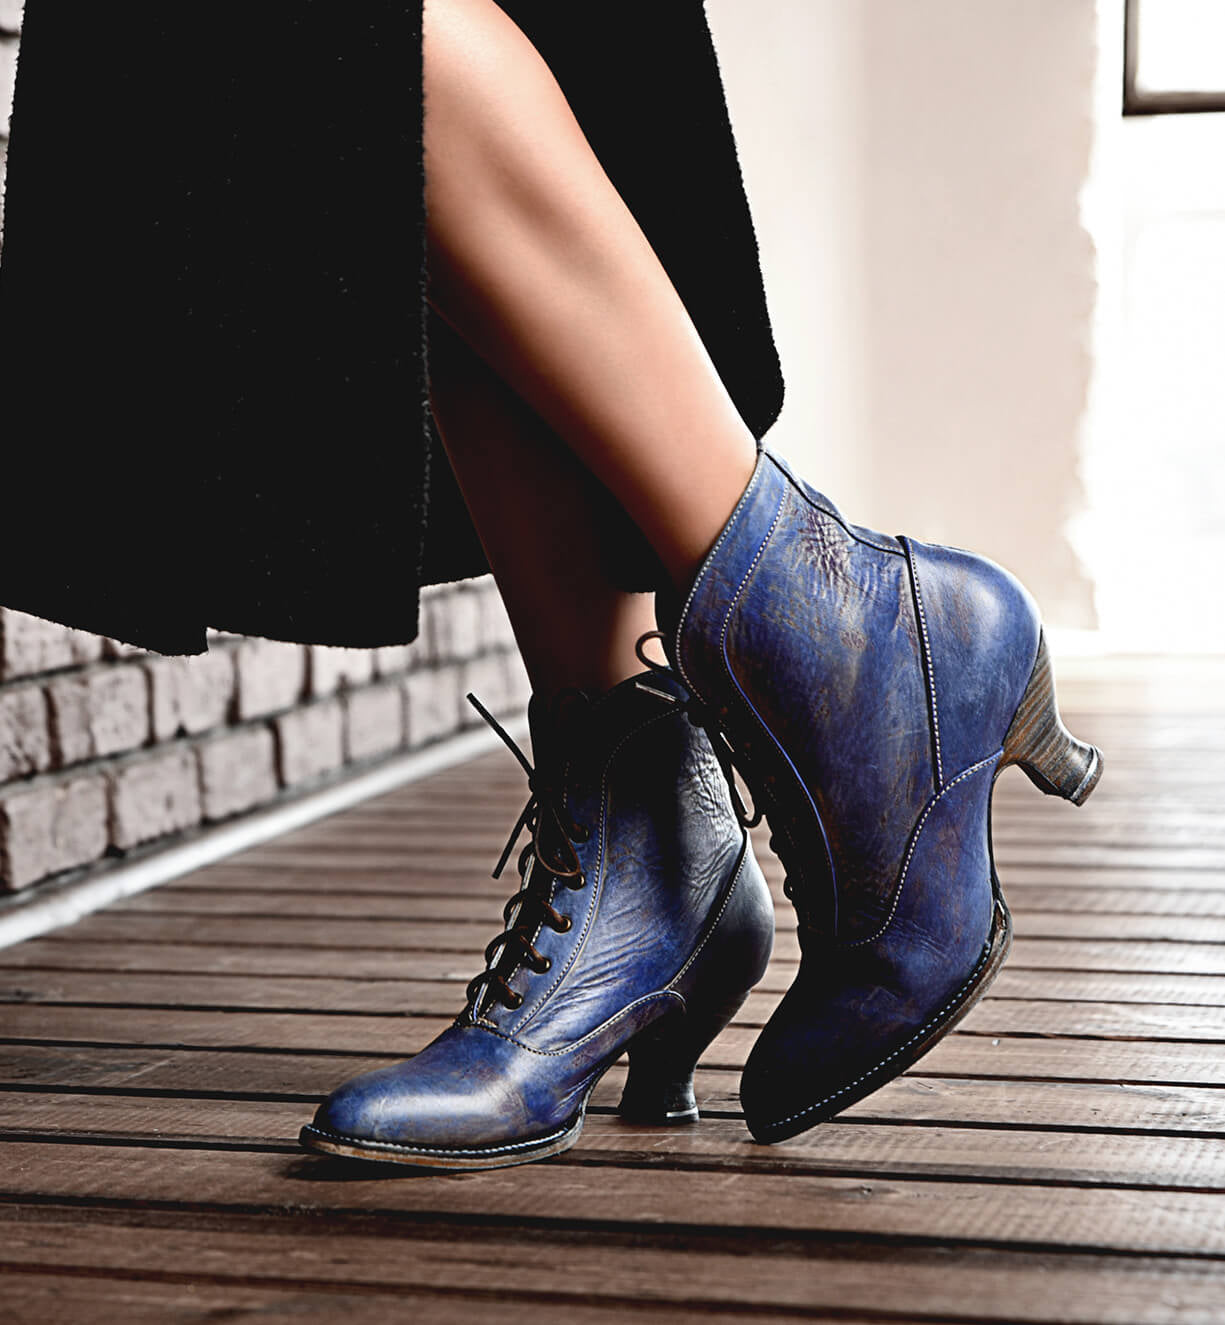 Oak Tree Farms Jacquelyn, a woman wearing handcrafted blue leather boots, showcases her fashionable footwear as she confidently walks across a wooden floor. The boots feature a leather welted outsole for added durability and.